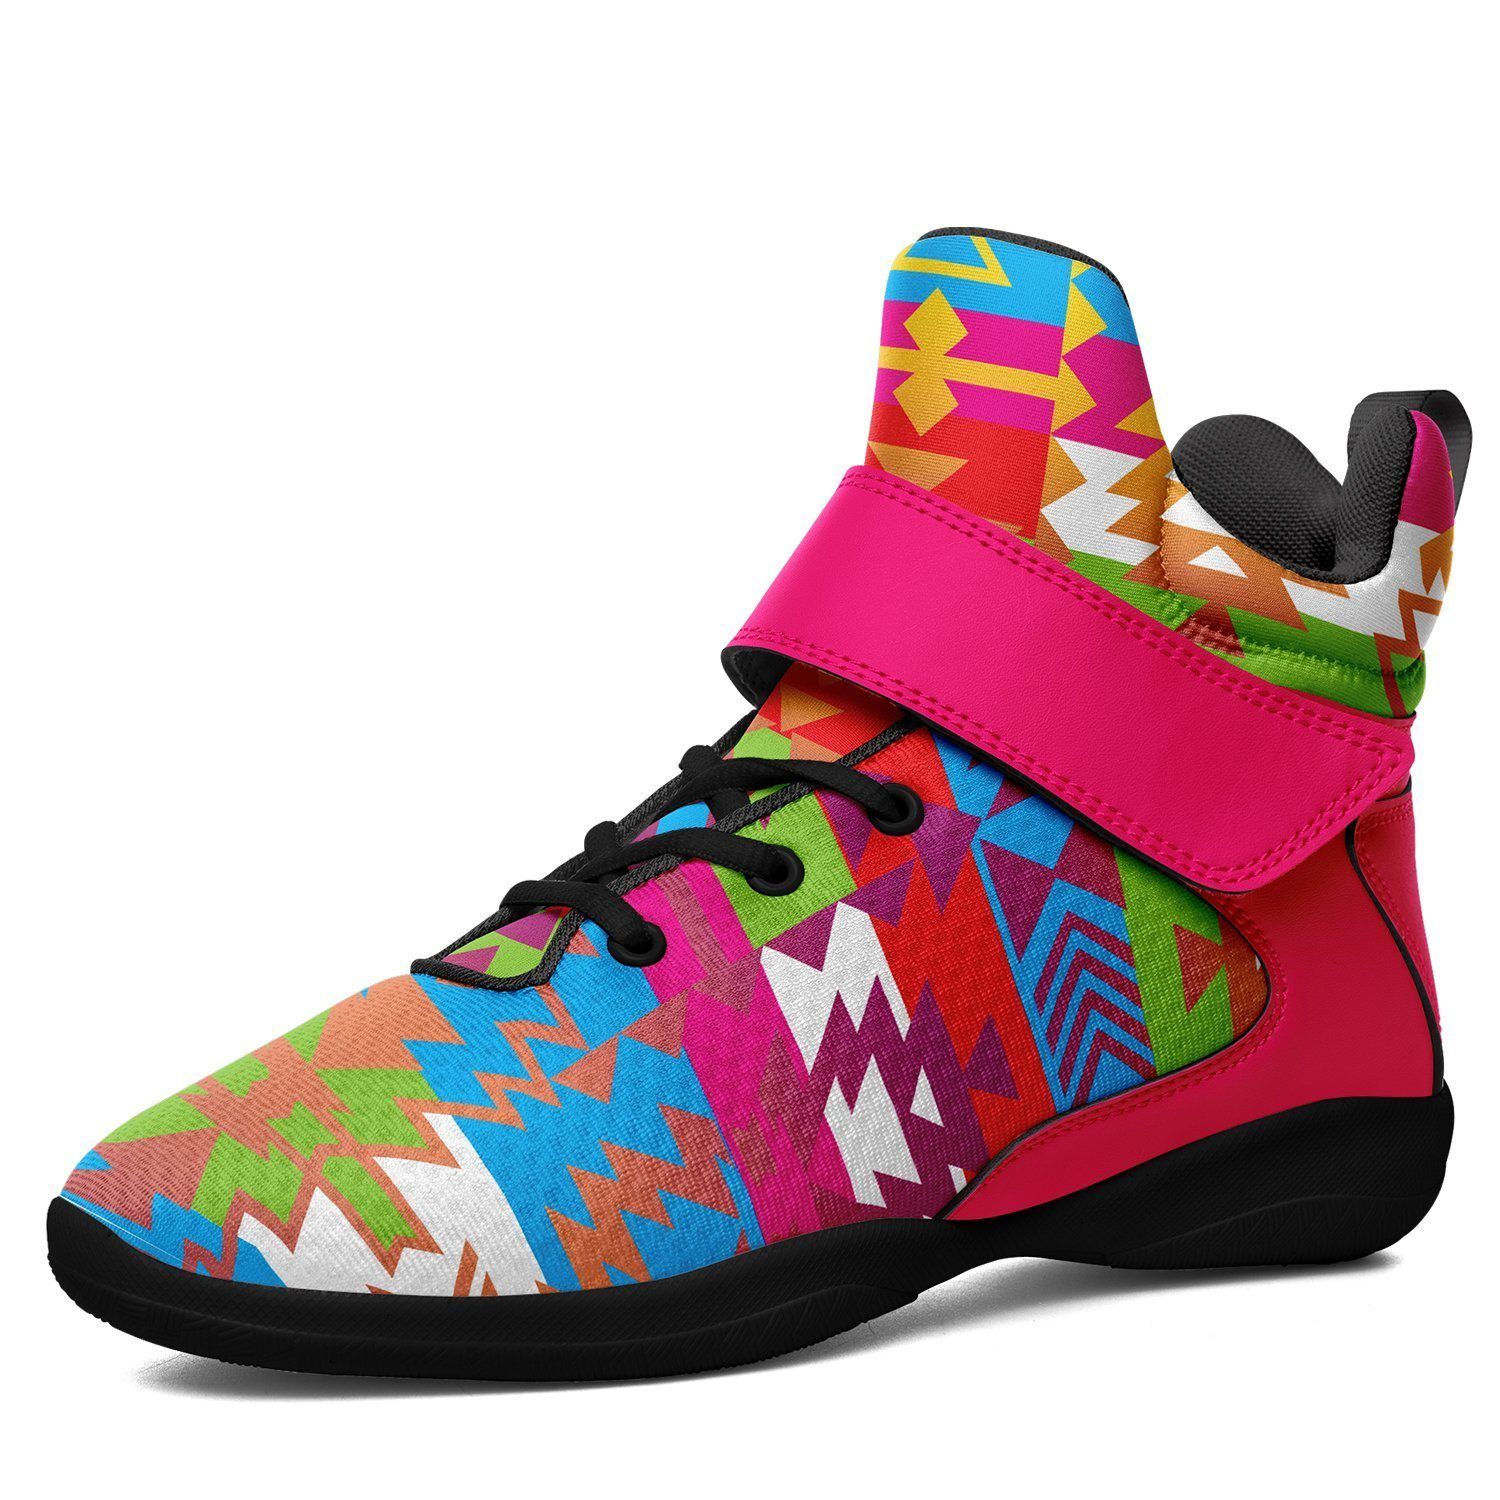 Grand Entry Kid's Ipottaa Basketball / Sport High Top Shoes 49 Dzine US Child 12.5 / EUR 30 Black Sole with Pink Strap 